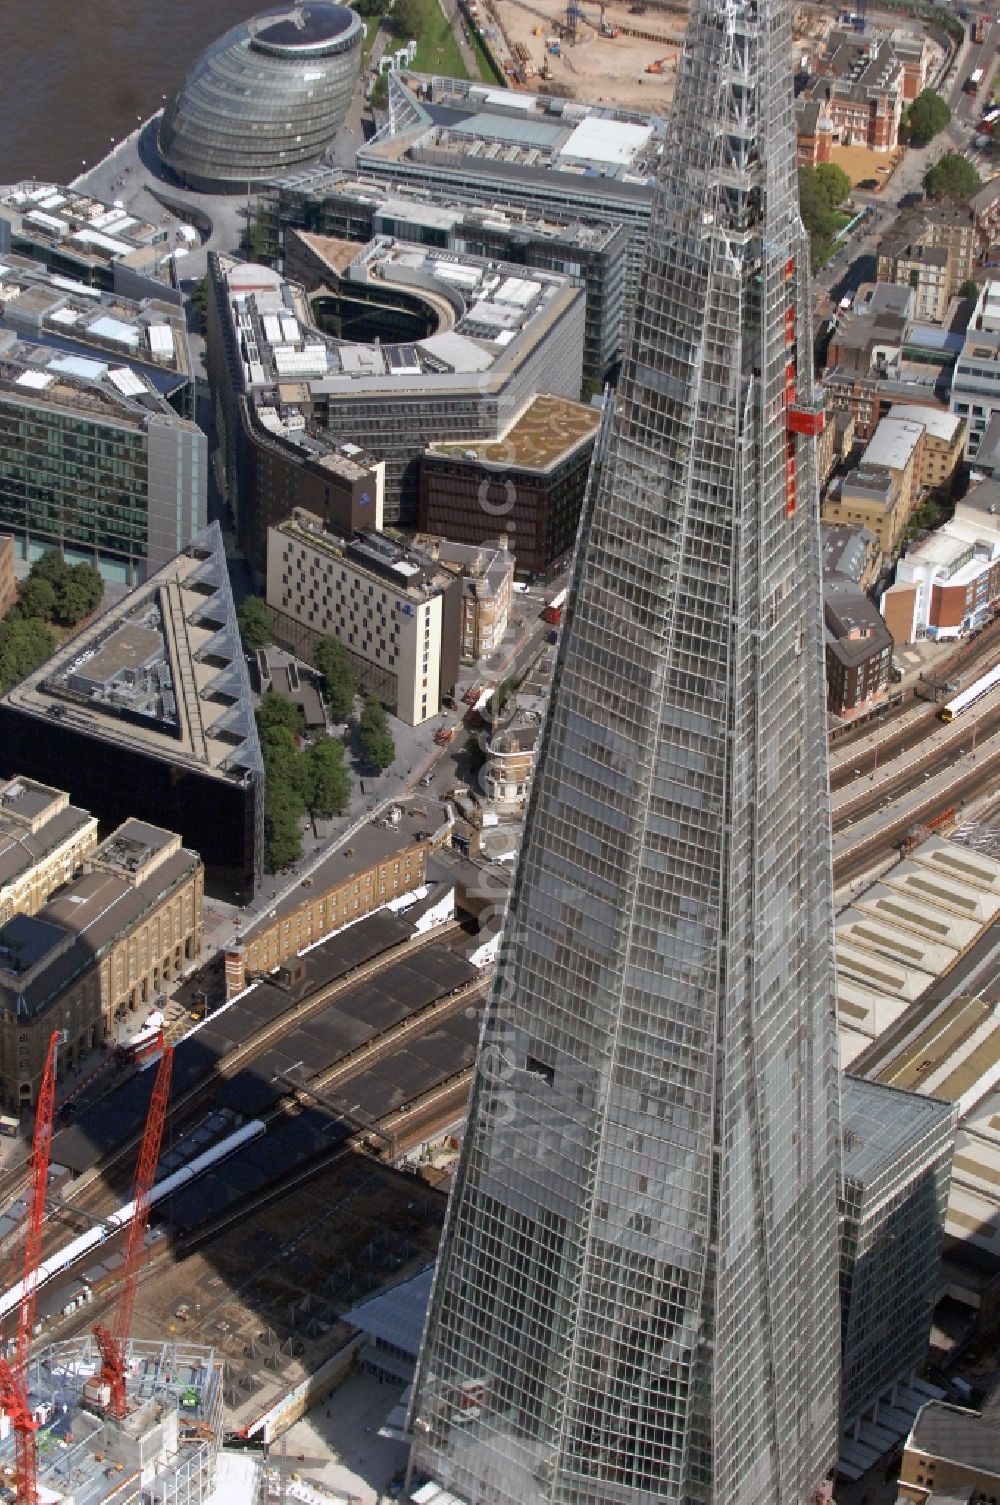 Aerial image London - View The Shard - Europe's tallest building. The high-rise occurs at the London Bridge Station. The Shard London Bridge (formerly known as London Bridge Tower, and Shard of Glass) is a skyscraper under construction in London, which will be on its completion as it stood at 310 meters, the second tallest building in Europe